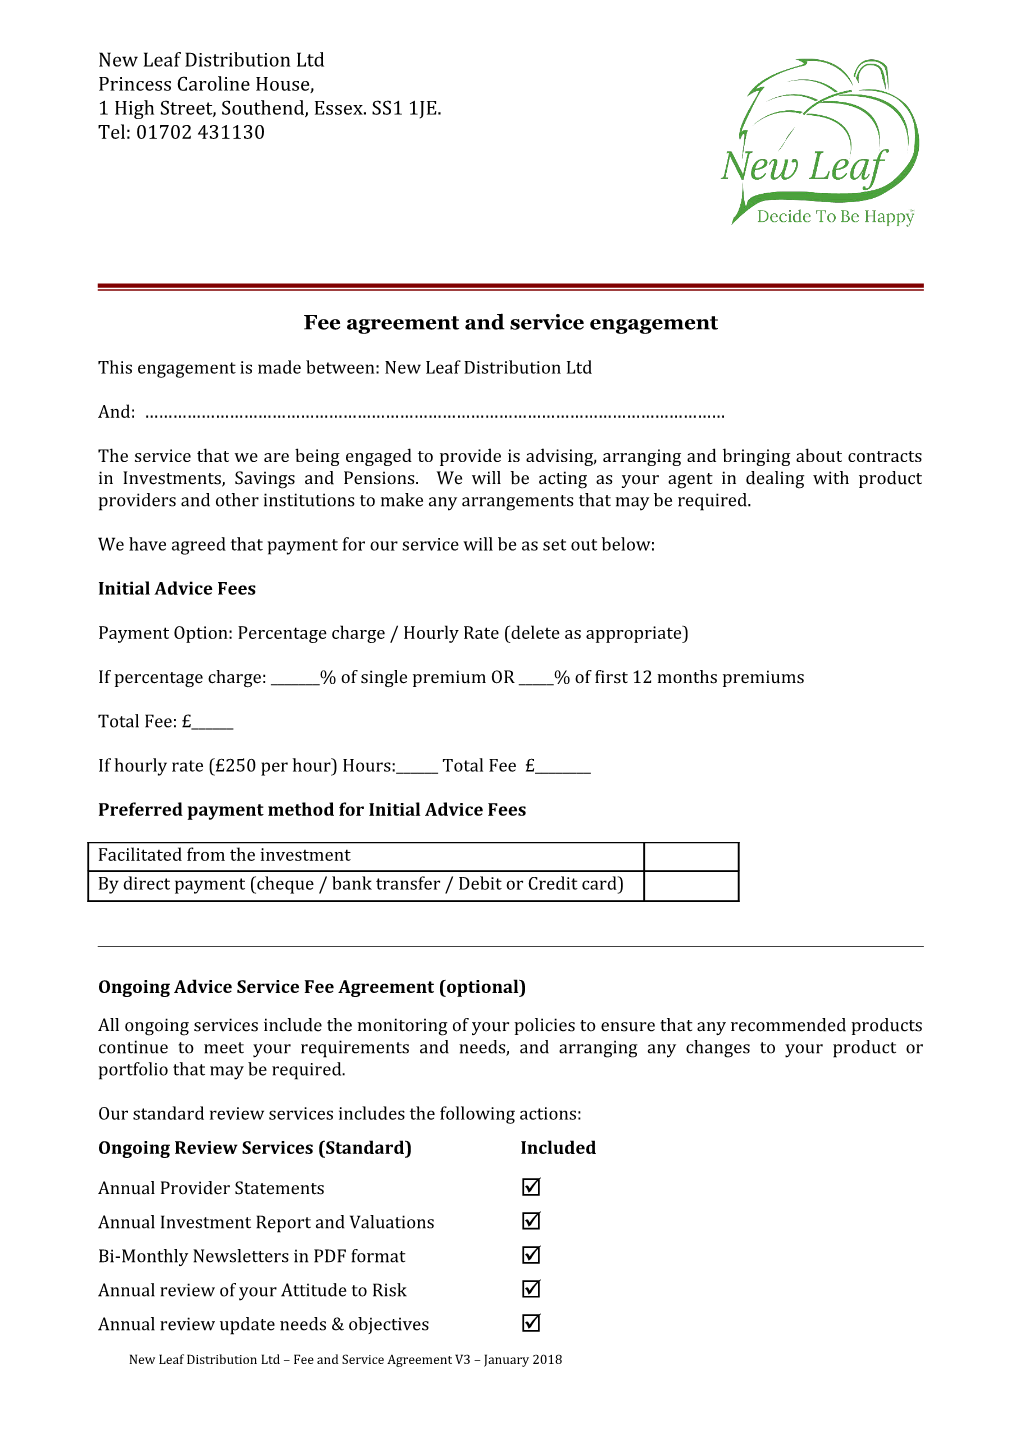 Our Services and Costs Agreement